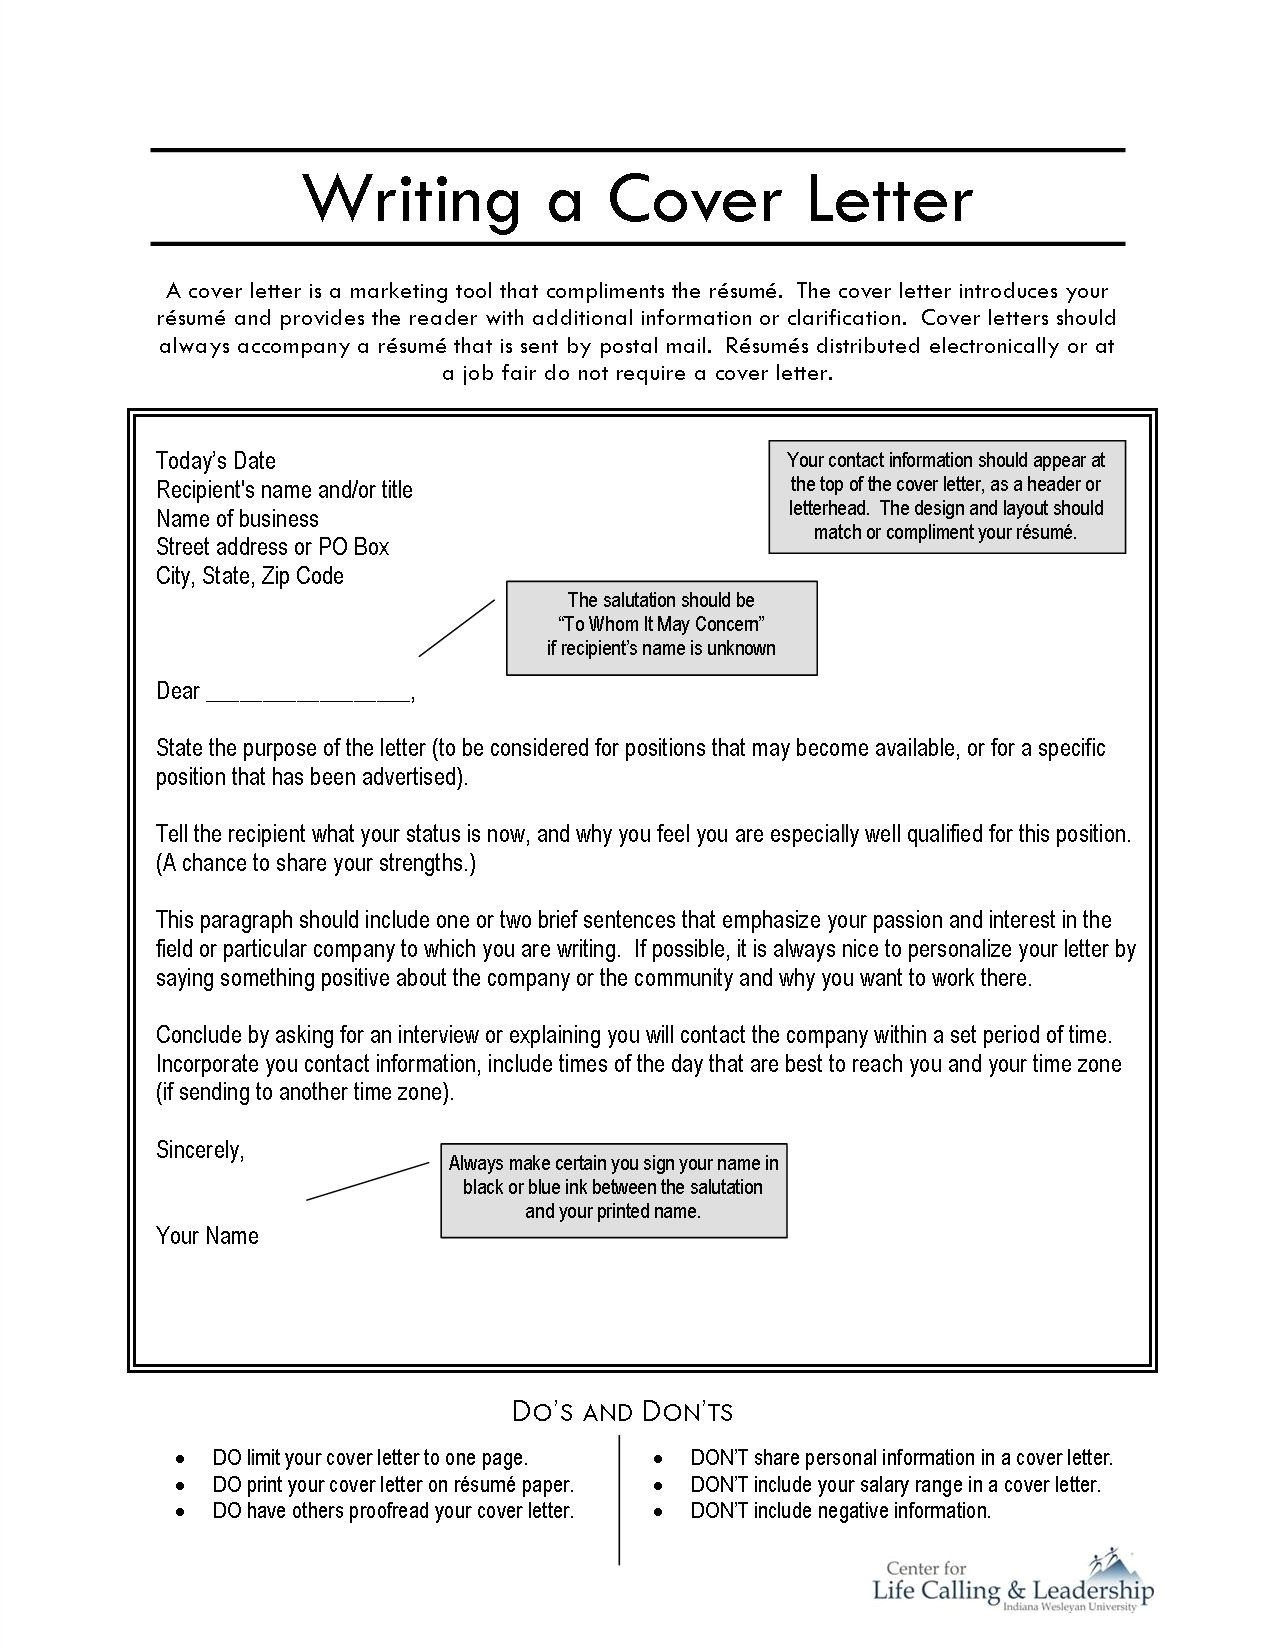 write a letter online and print it